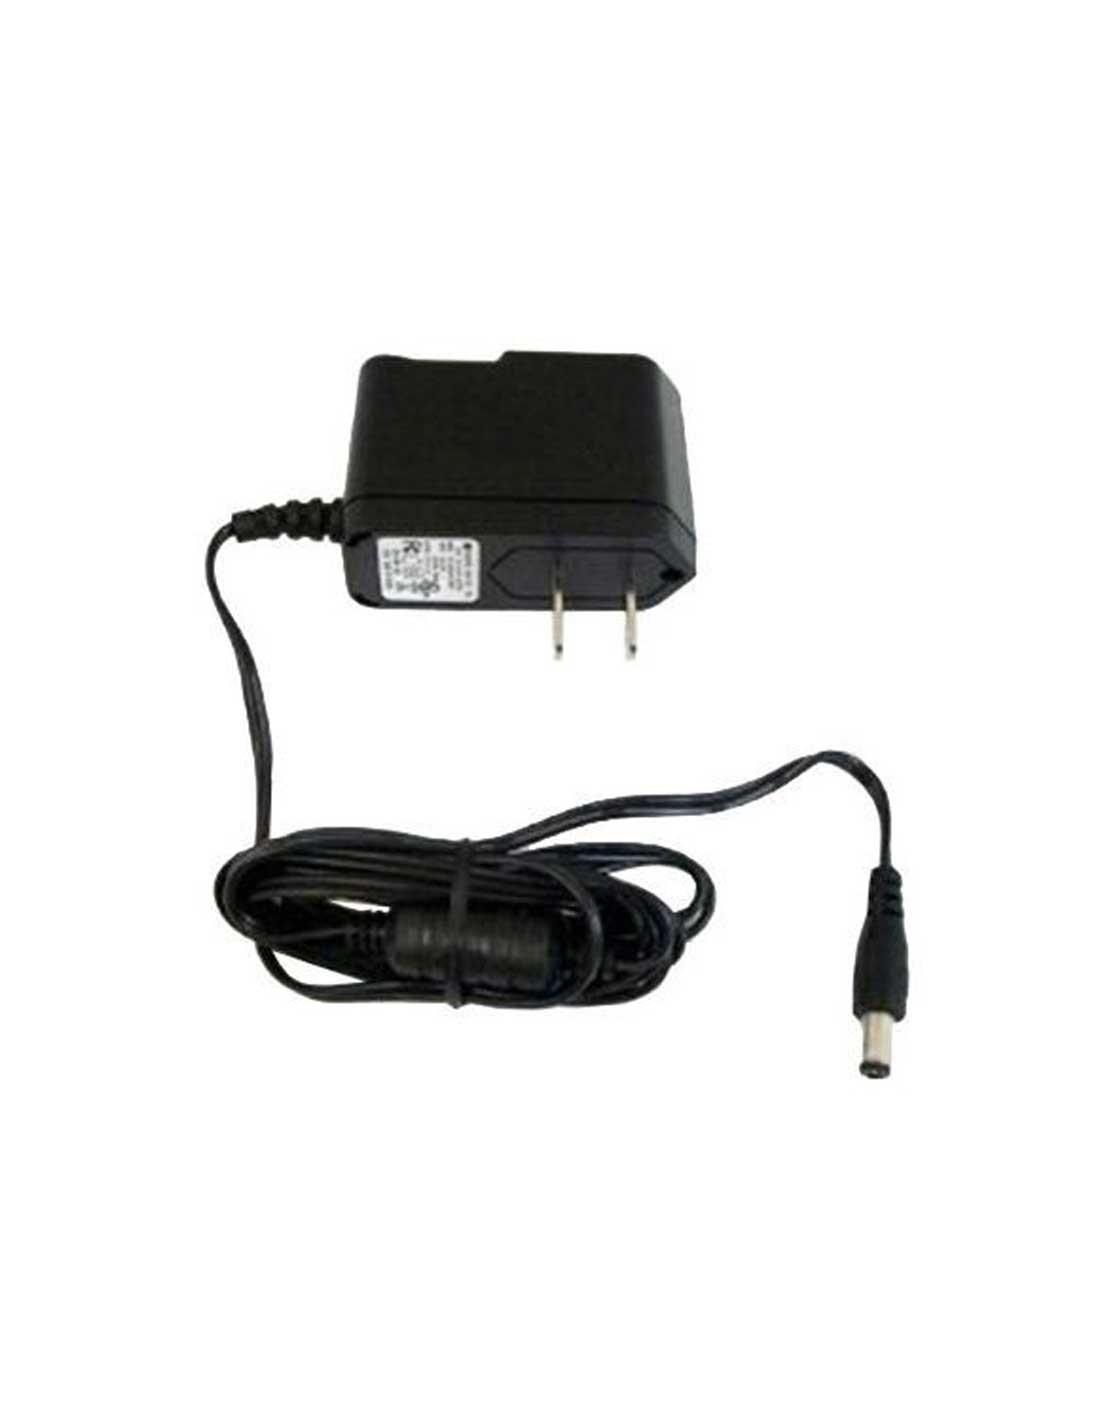 Yealink T49G Power Supply at a cheap price and free delivery in Dubai